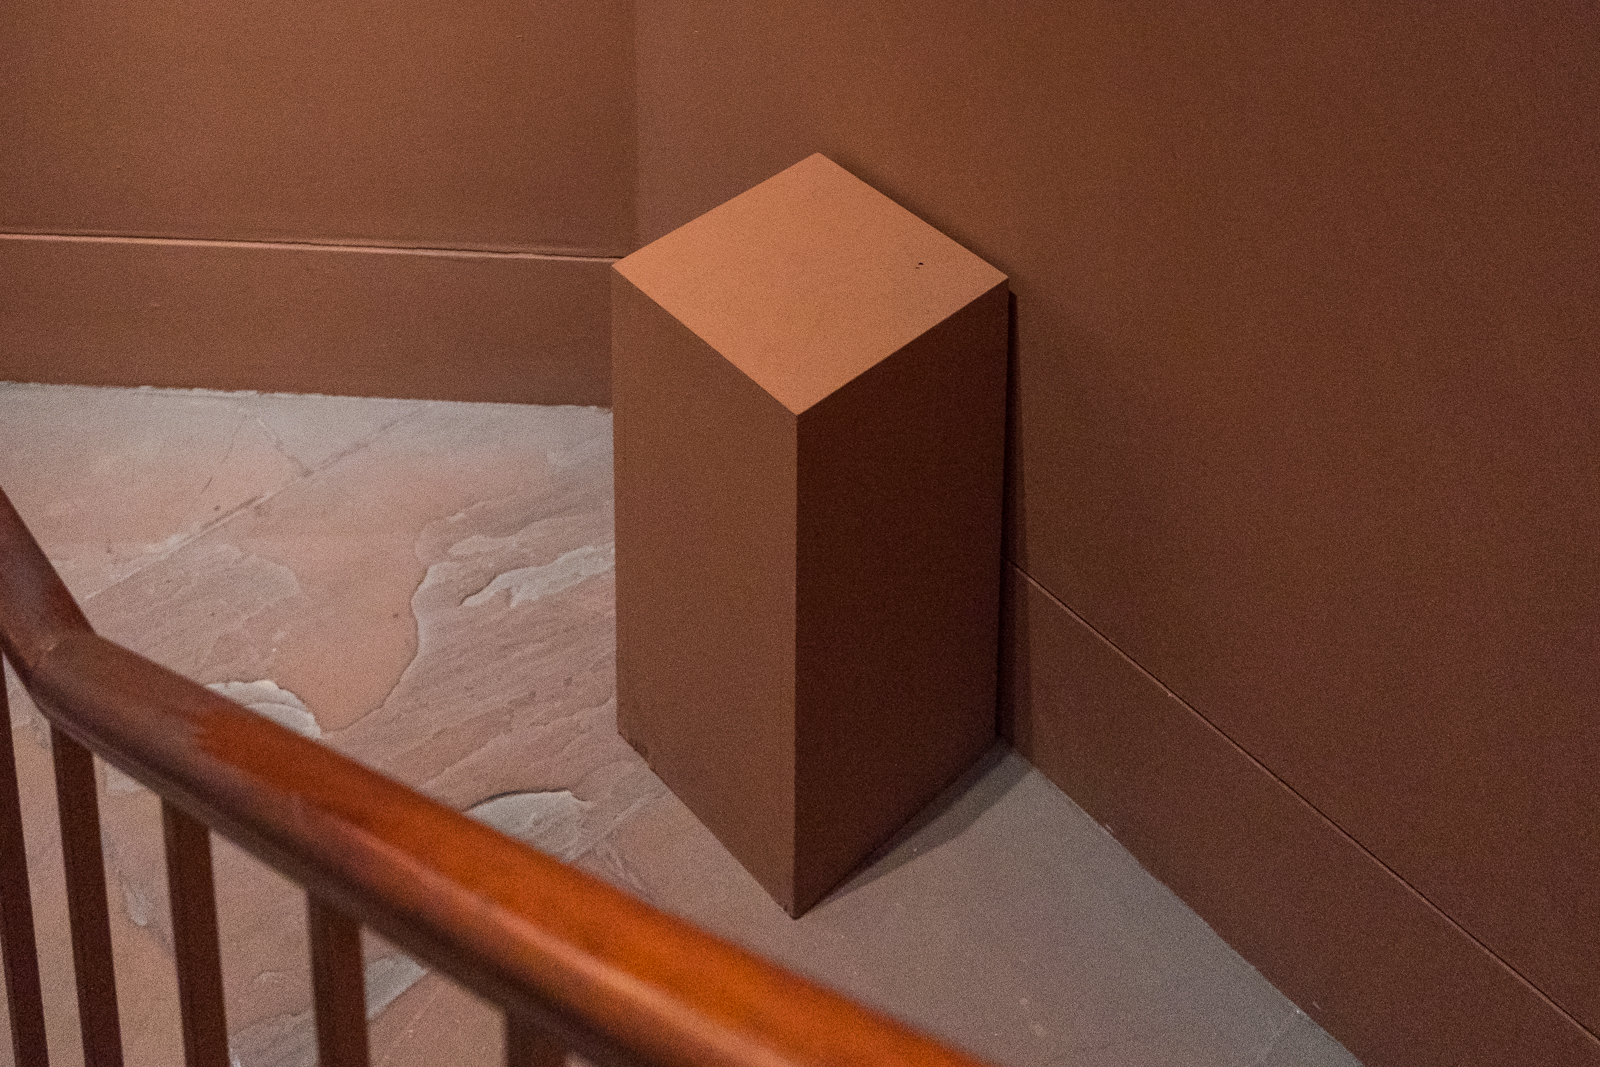   Untitled (On Sandstone With Banister)   2016 